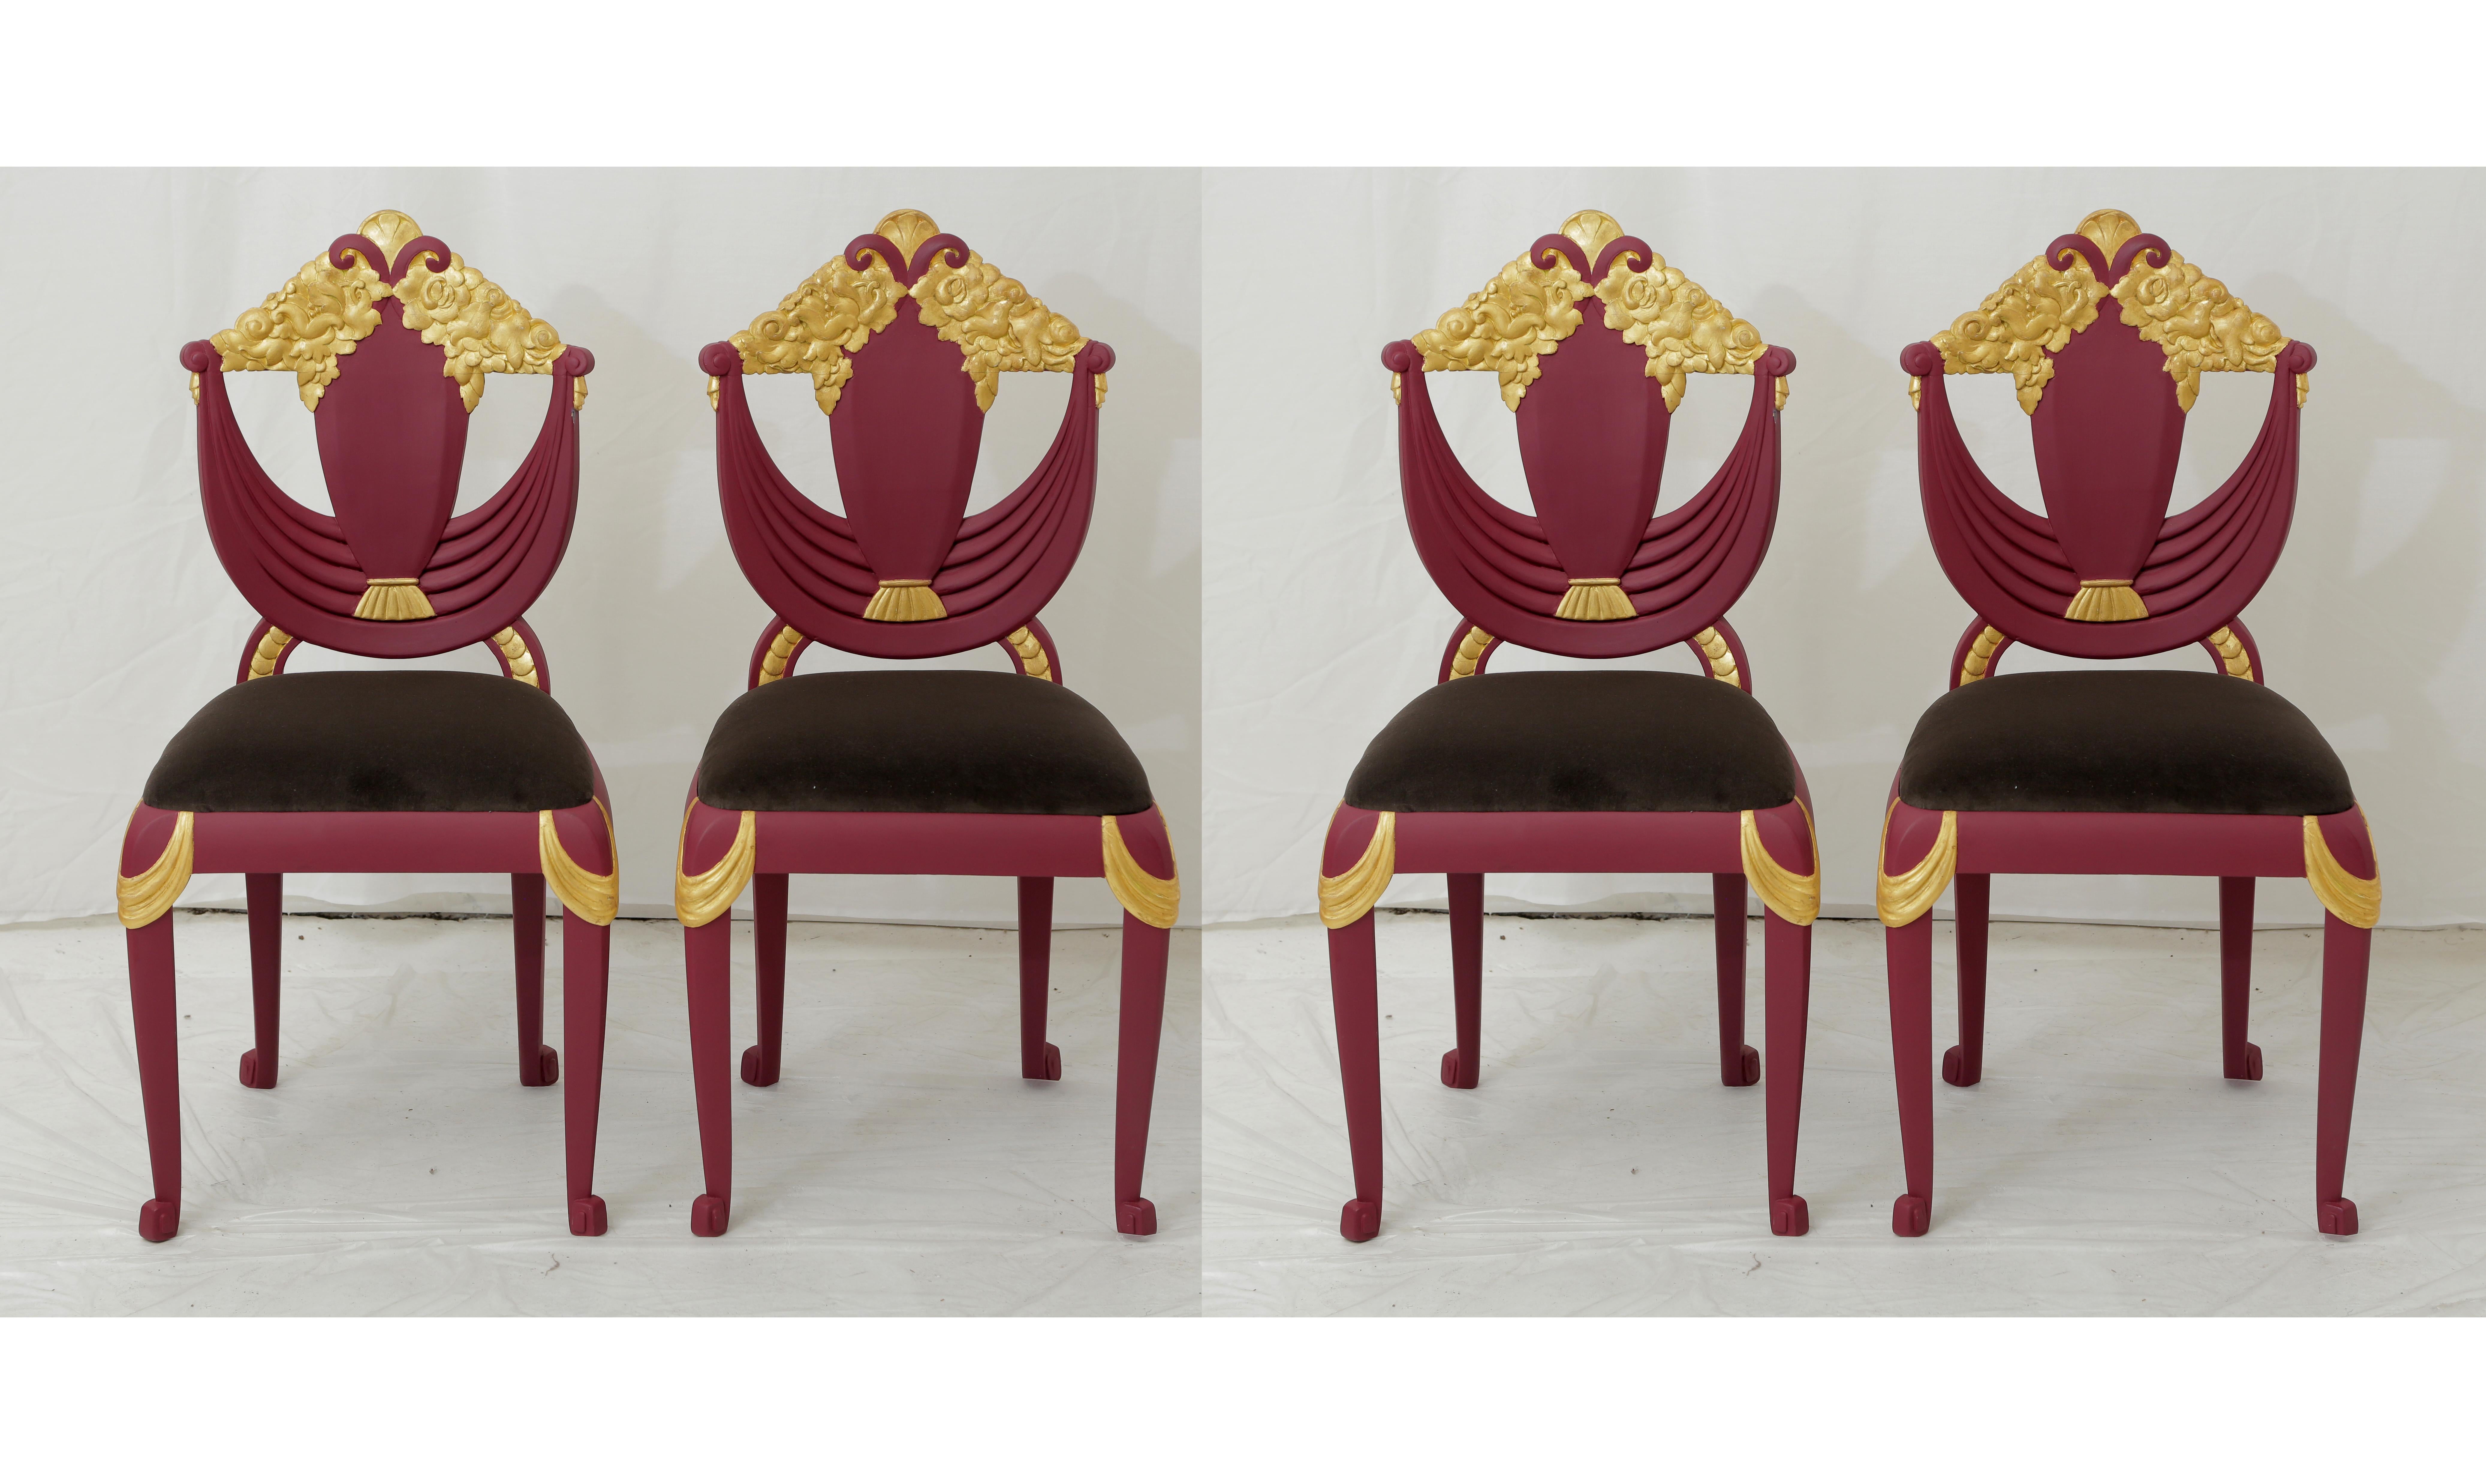 Set of four Art Deco (Transitional from Art Nouveau) chairs attributed to Sue & Mare made of beechwood and painted in a Burgundy color with gold leaf gilded carved ornaments on the hand carved parts. Reupholstered with a brand new dark grey velvet